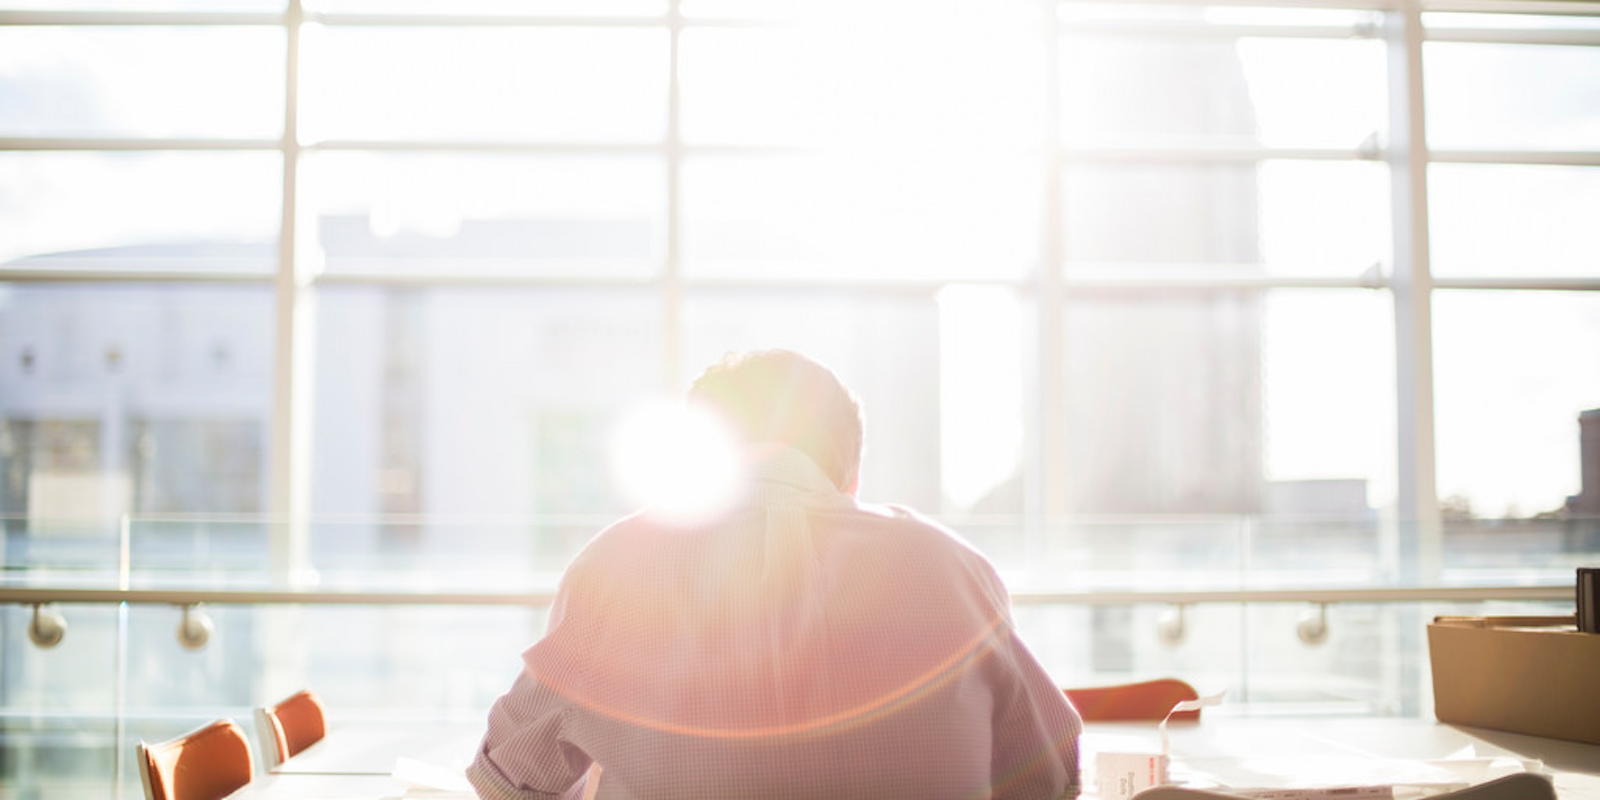 Man working at a table with lens flare